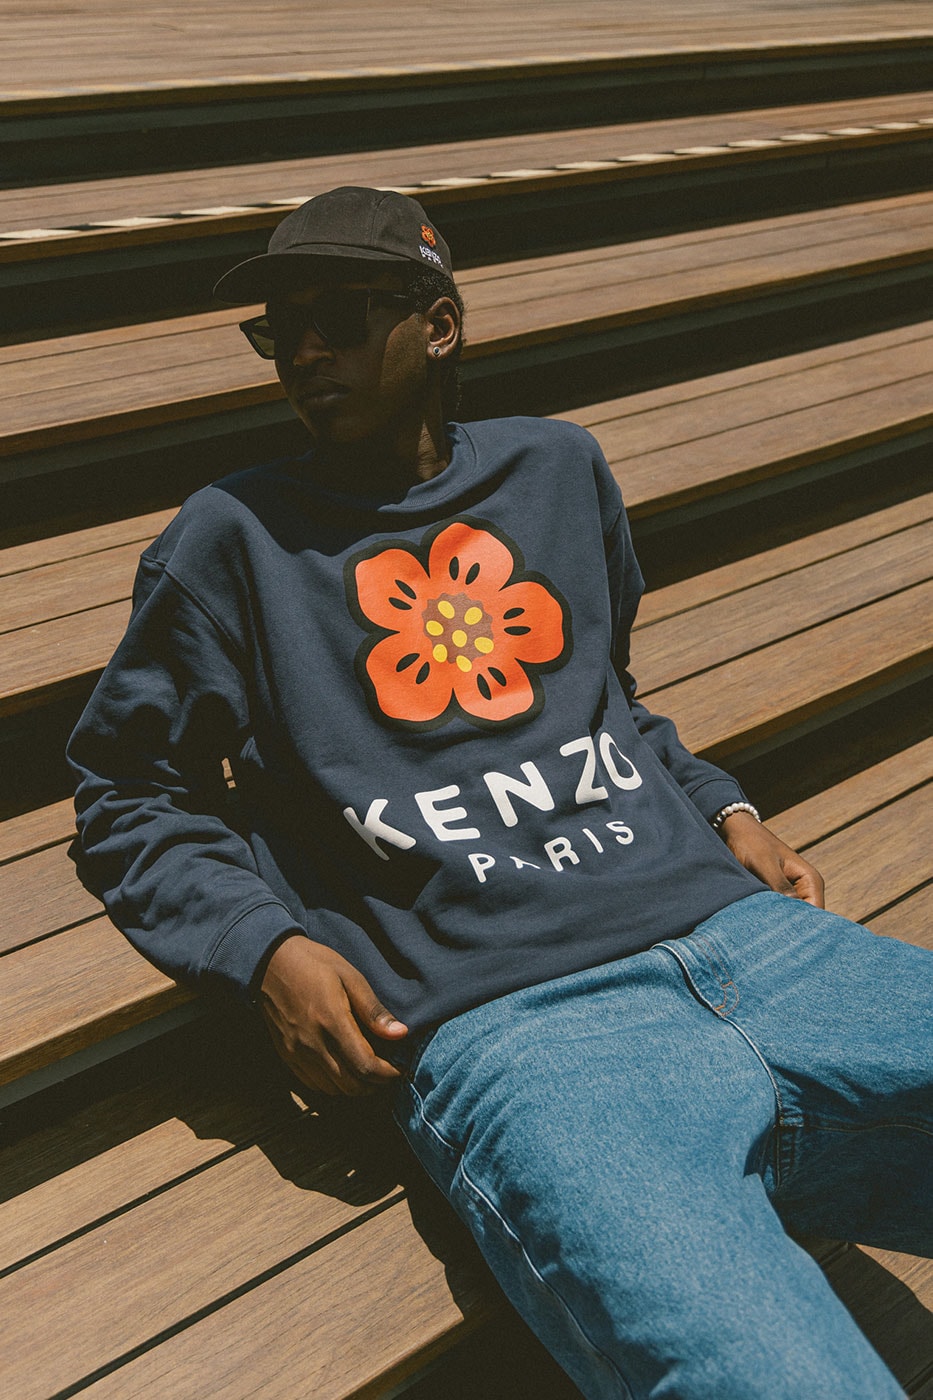 Kenzo Releases FW22 Collection Designed by NIGO